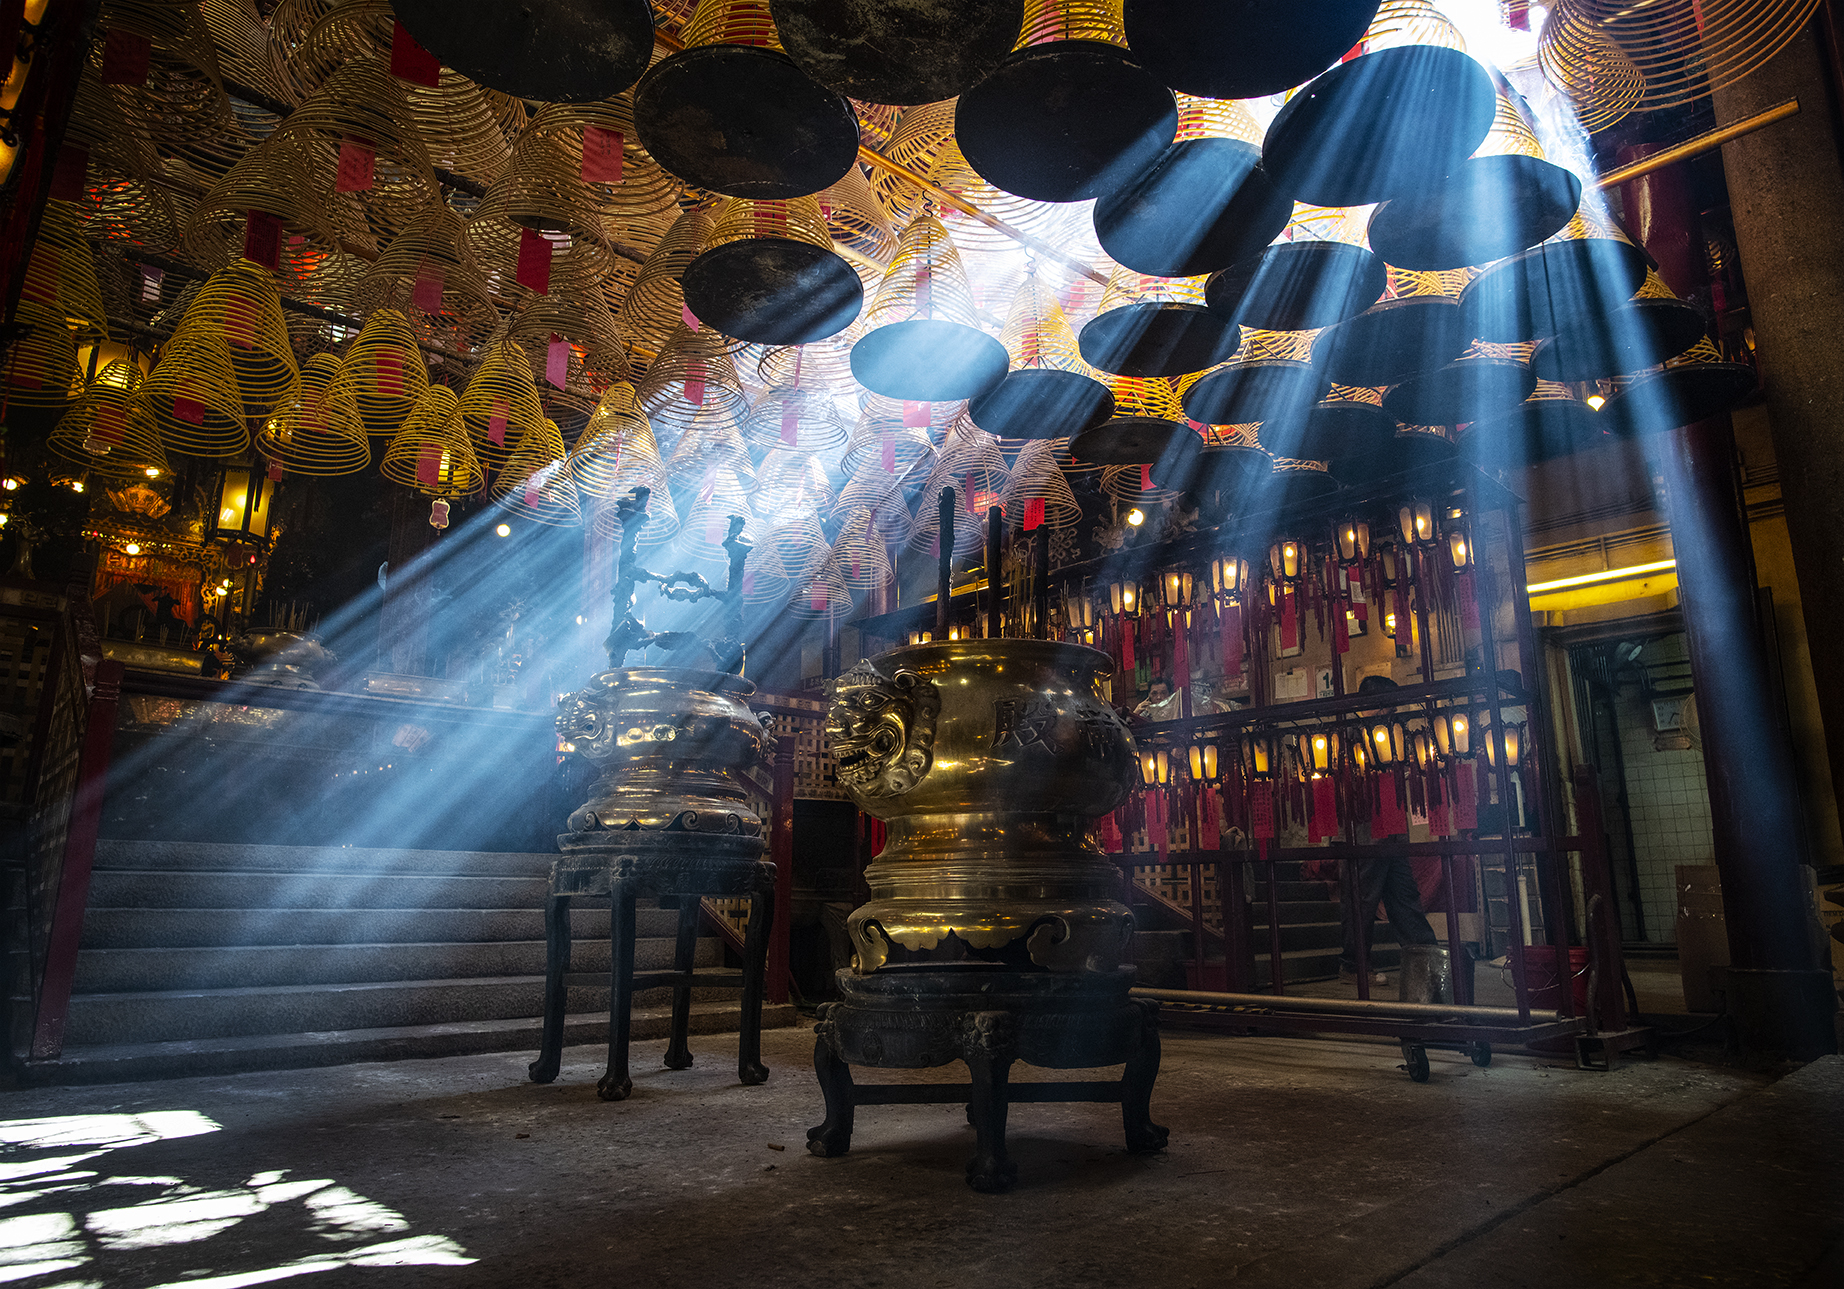 blades of light cut through the mist of Man Mo temple in Hong Kong